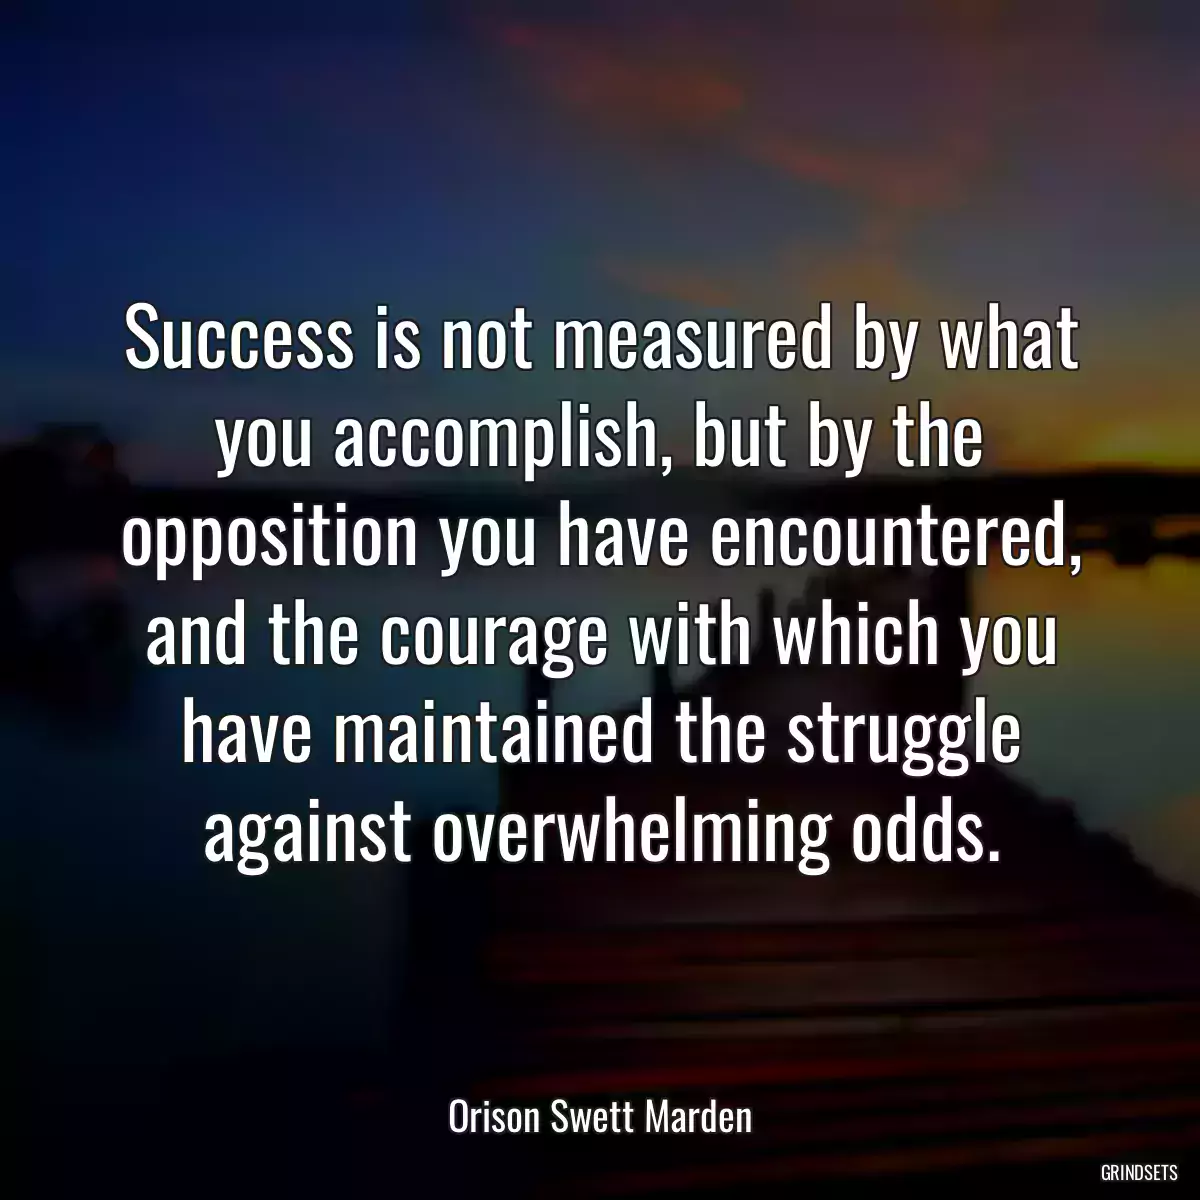 Success is not measured by what you accomplish, but by the opposition you have encountered, and the courage with which you have maintained the struggle against overwhelming odds.